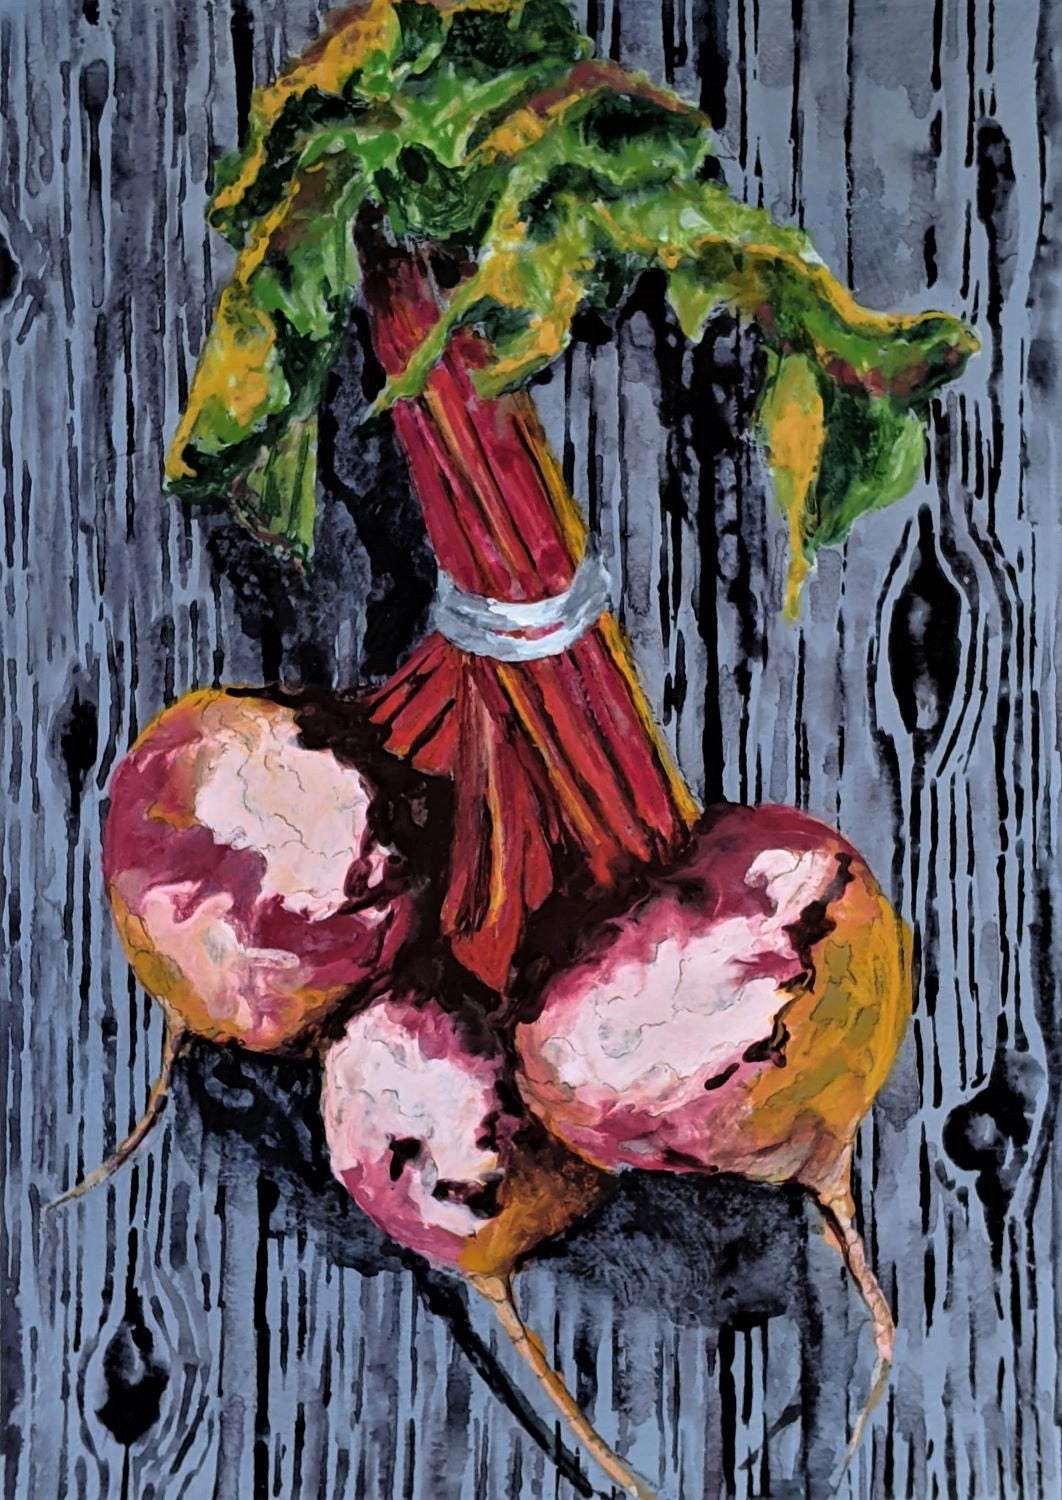 Hanging Beets